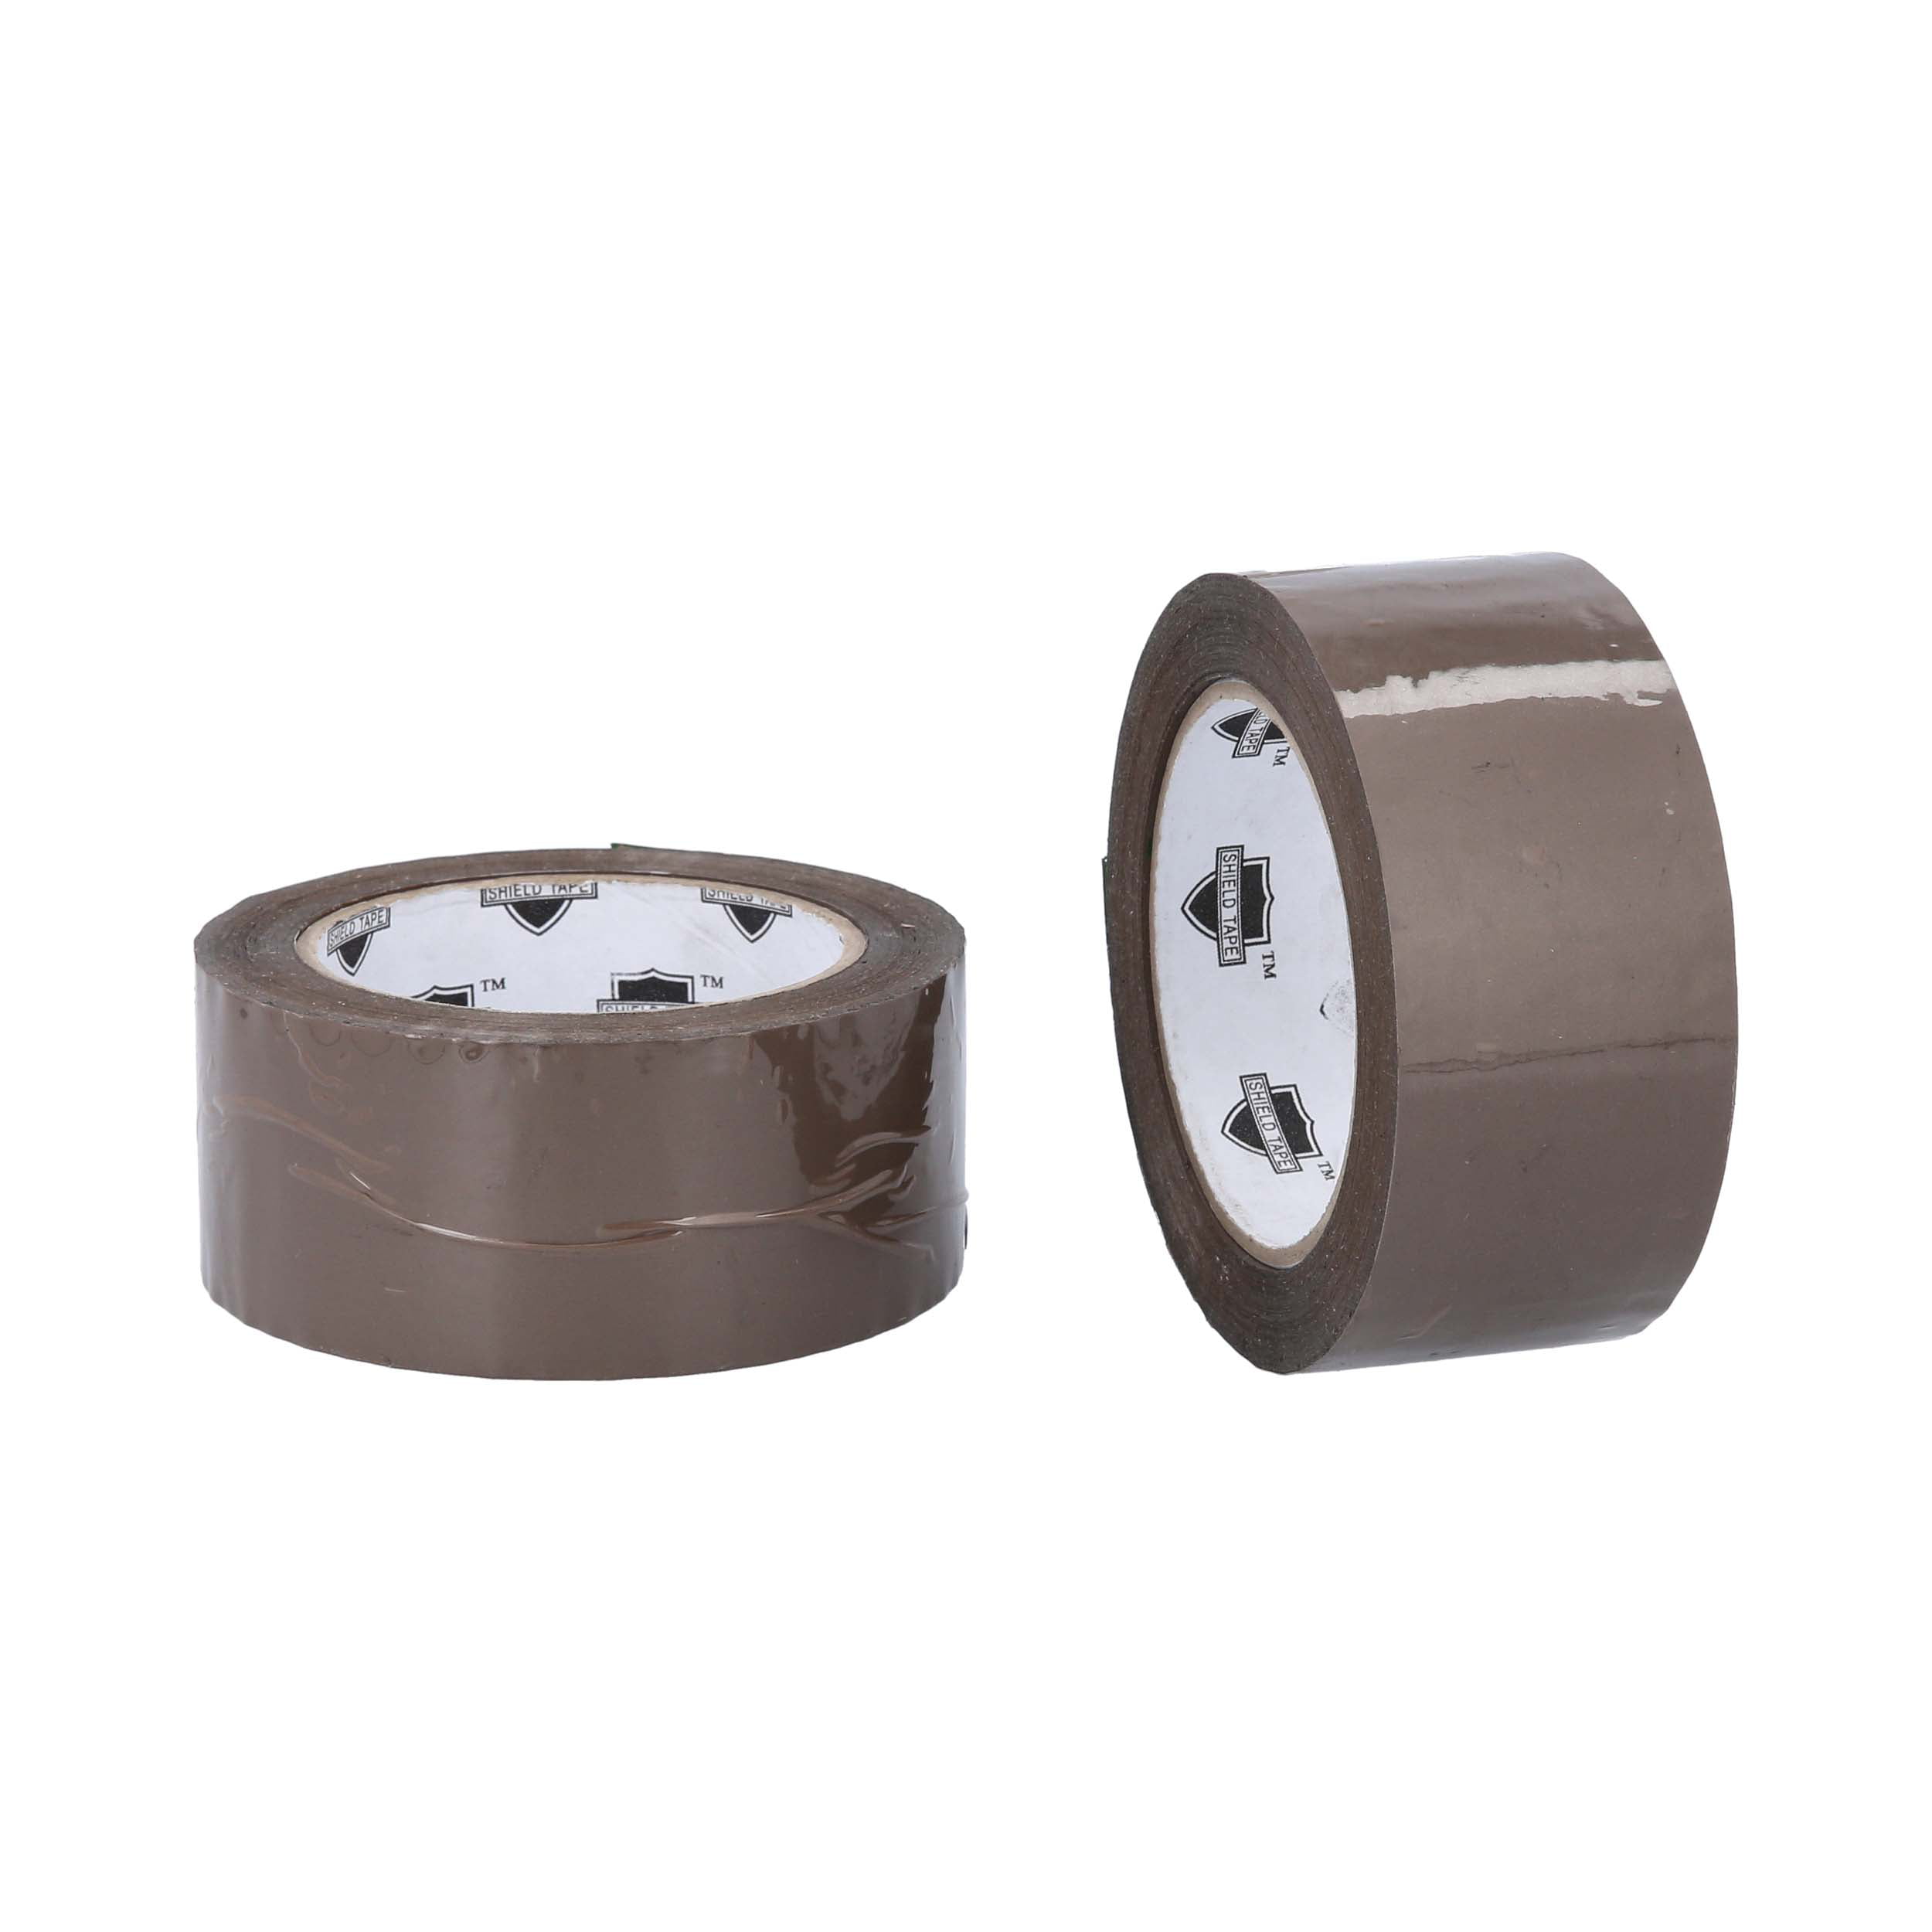 FRAGILE CLEAR DUCT TAPE ETC MULTI LISTING STRONG BROWN ALL PACKING TAPES 